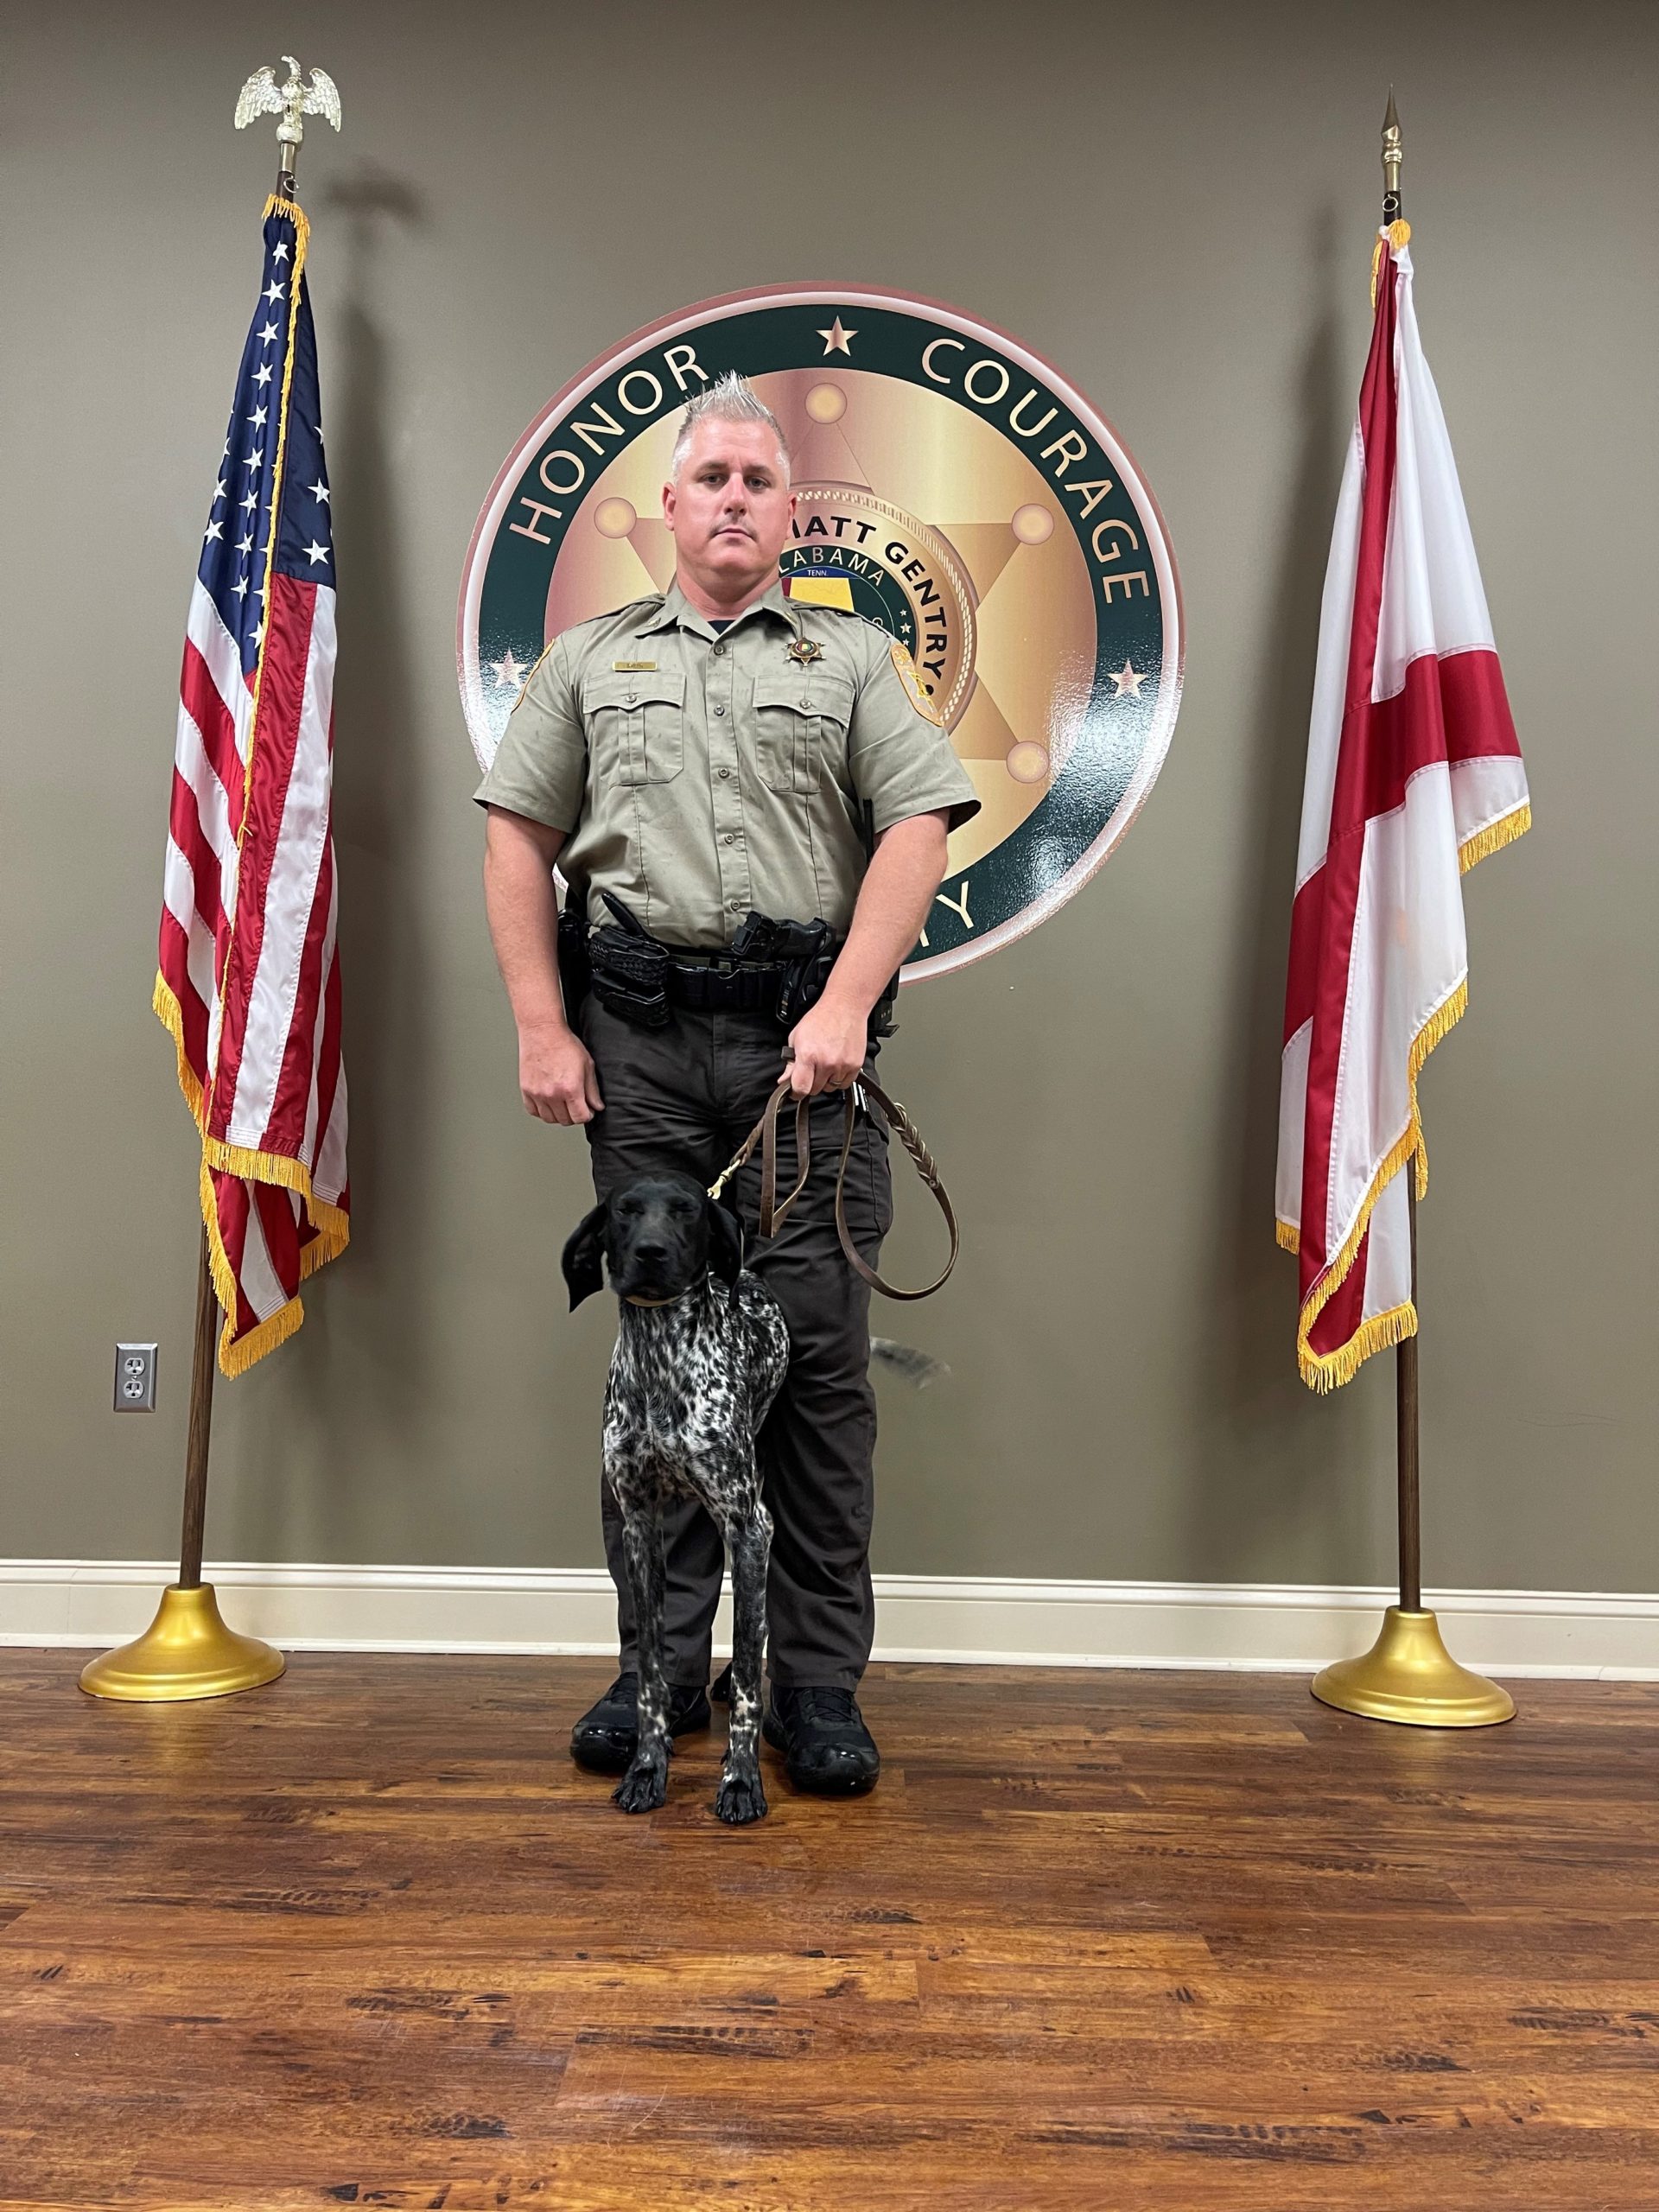 Sgt. Terry Smith with K9 Kira